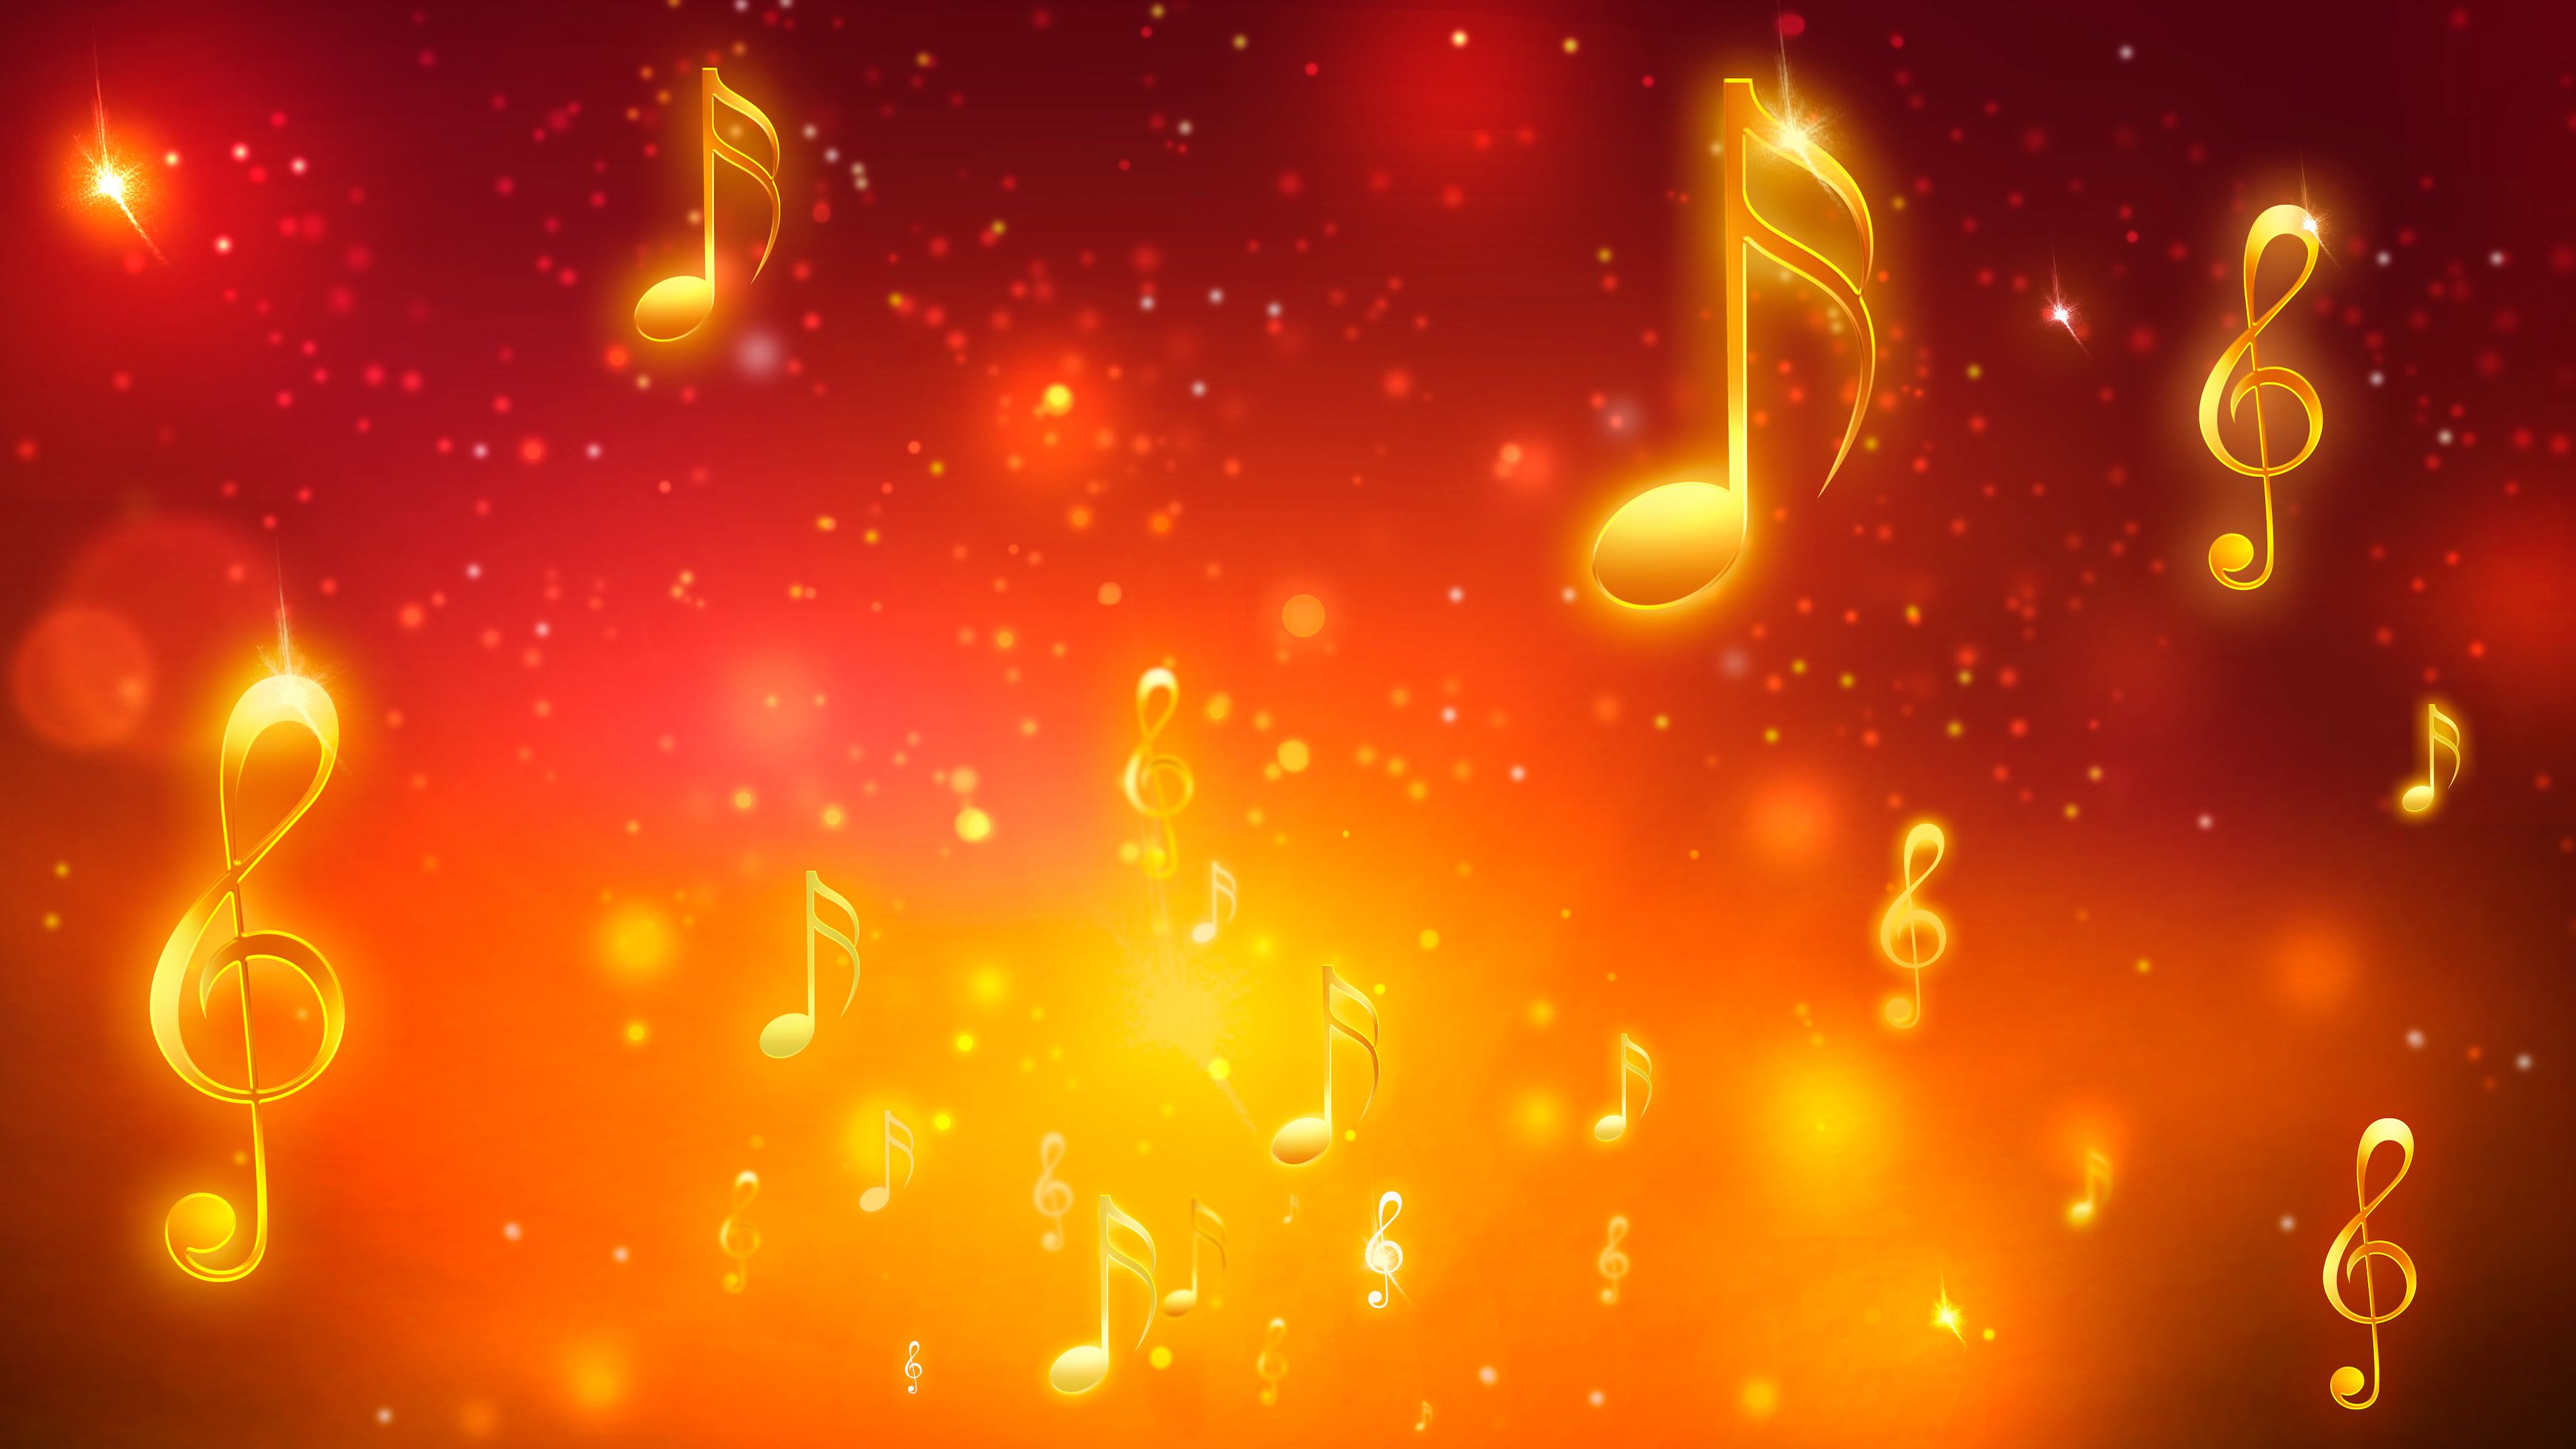 Music themed background with yellow-orange colored notes and treble icons spread around in varying sizes, showing depth in the image.